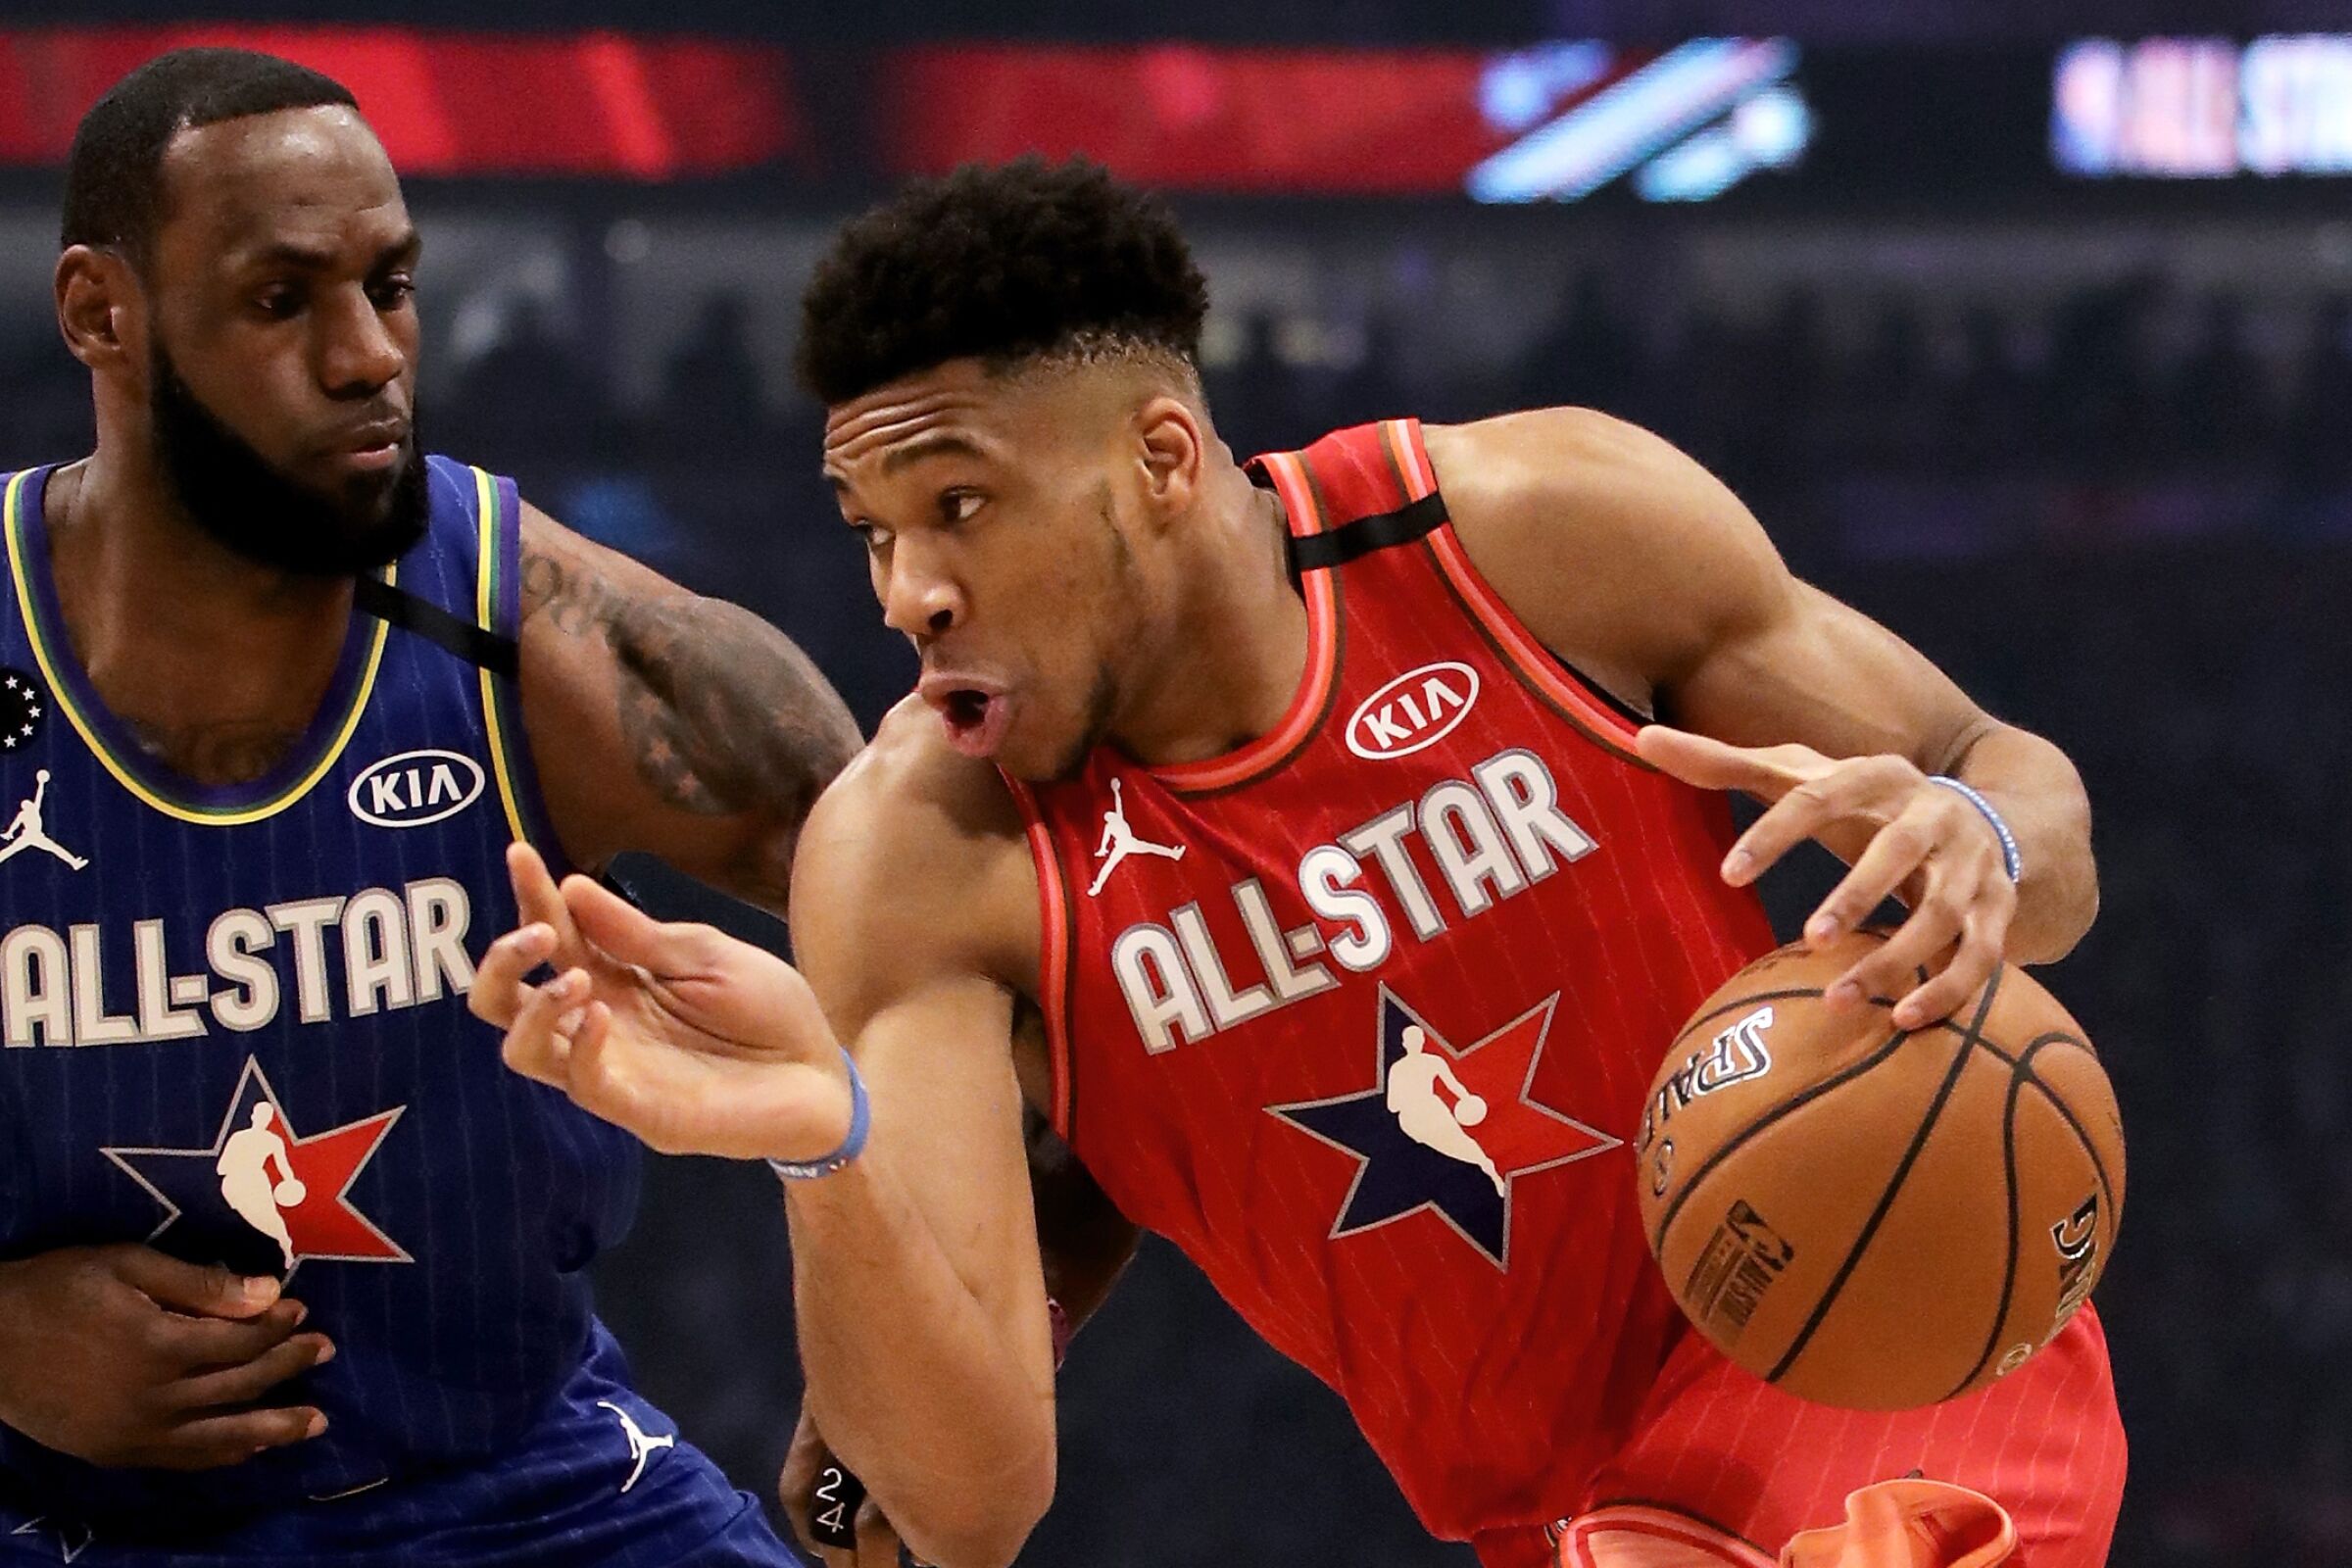 Giannis Antetokounmpo drives against LeBron James during the 2020 NBA All-Star Game in Chicago.